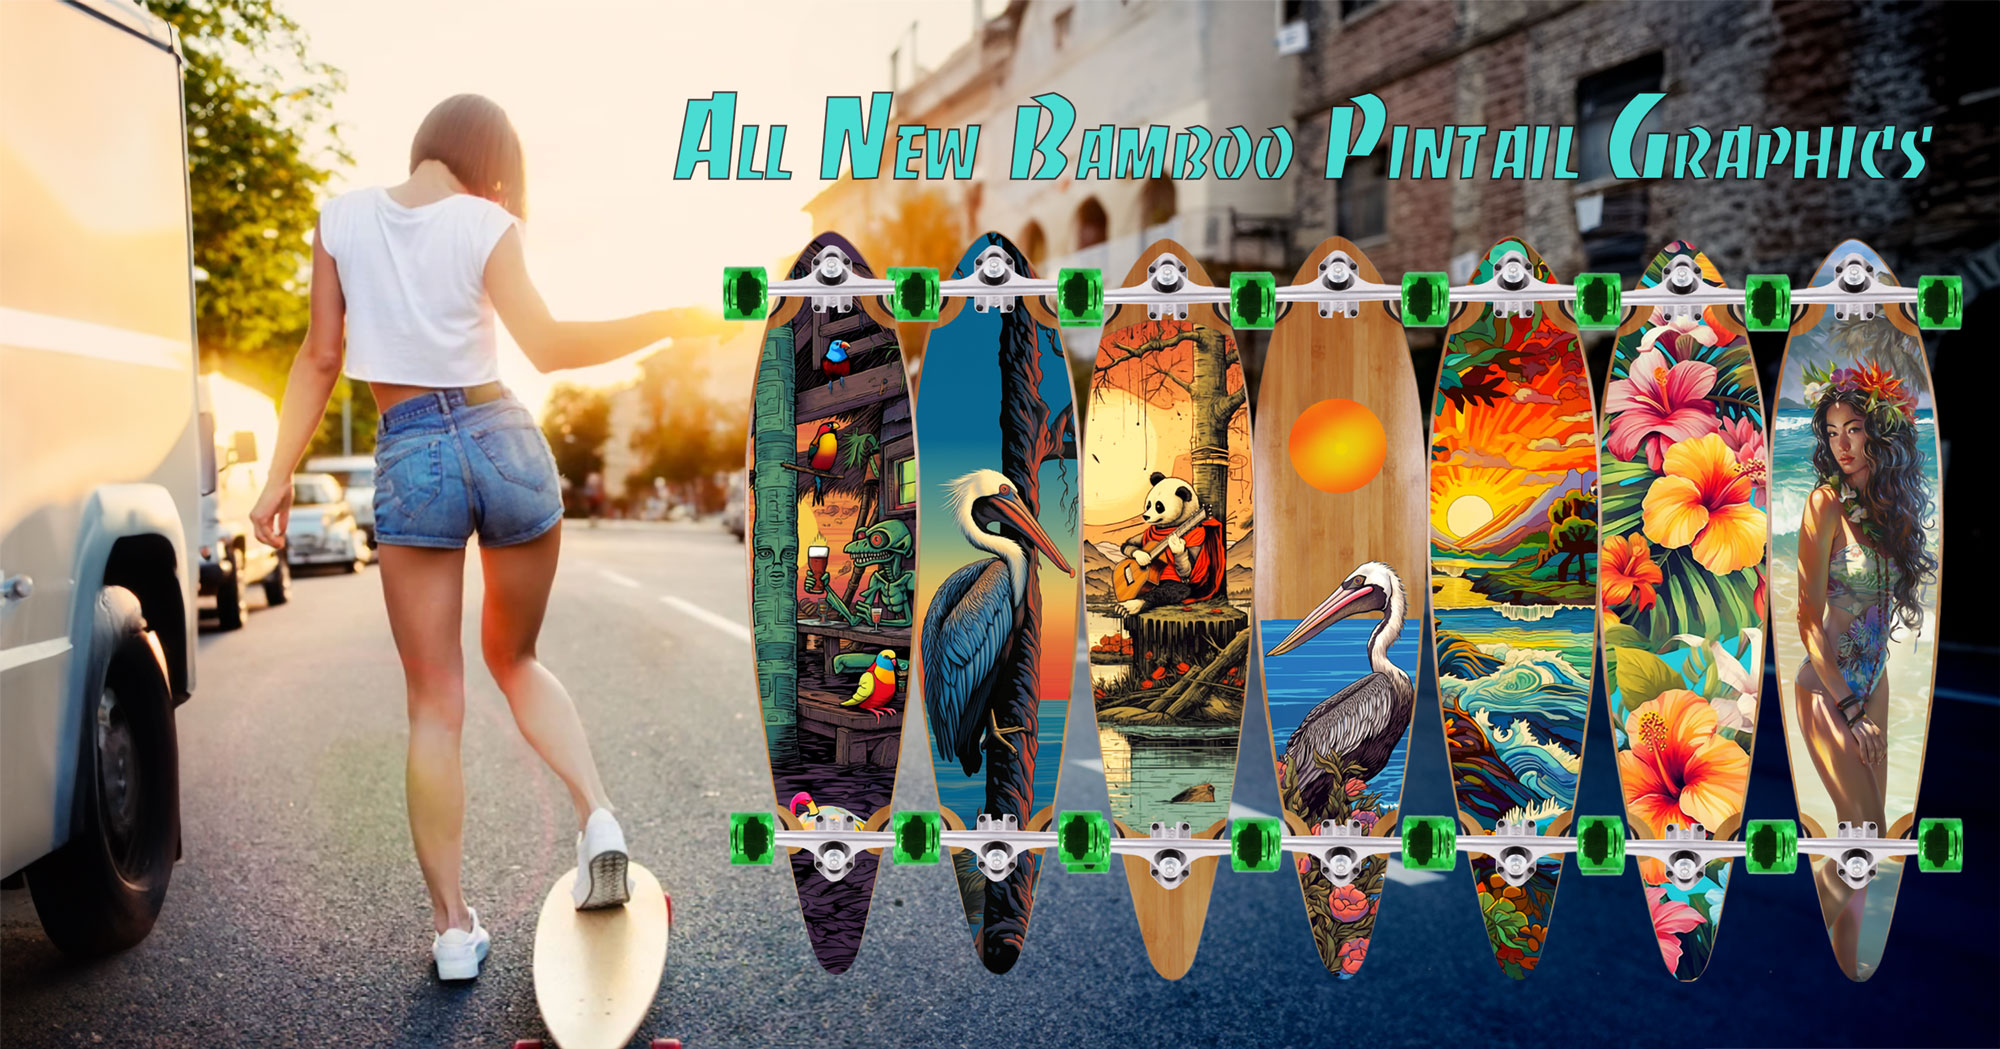 New Bamboo Pintail Graphics